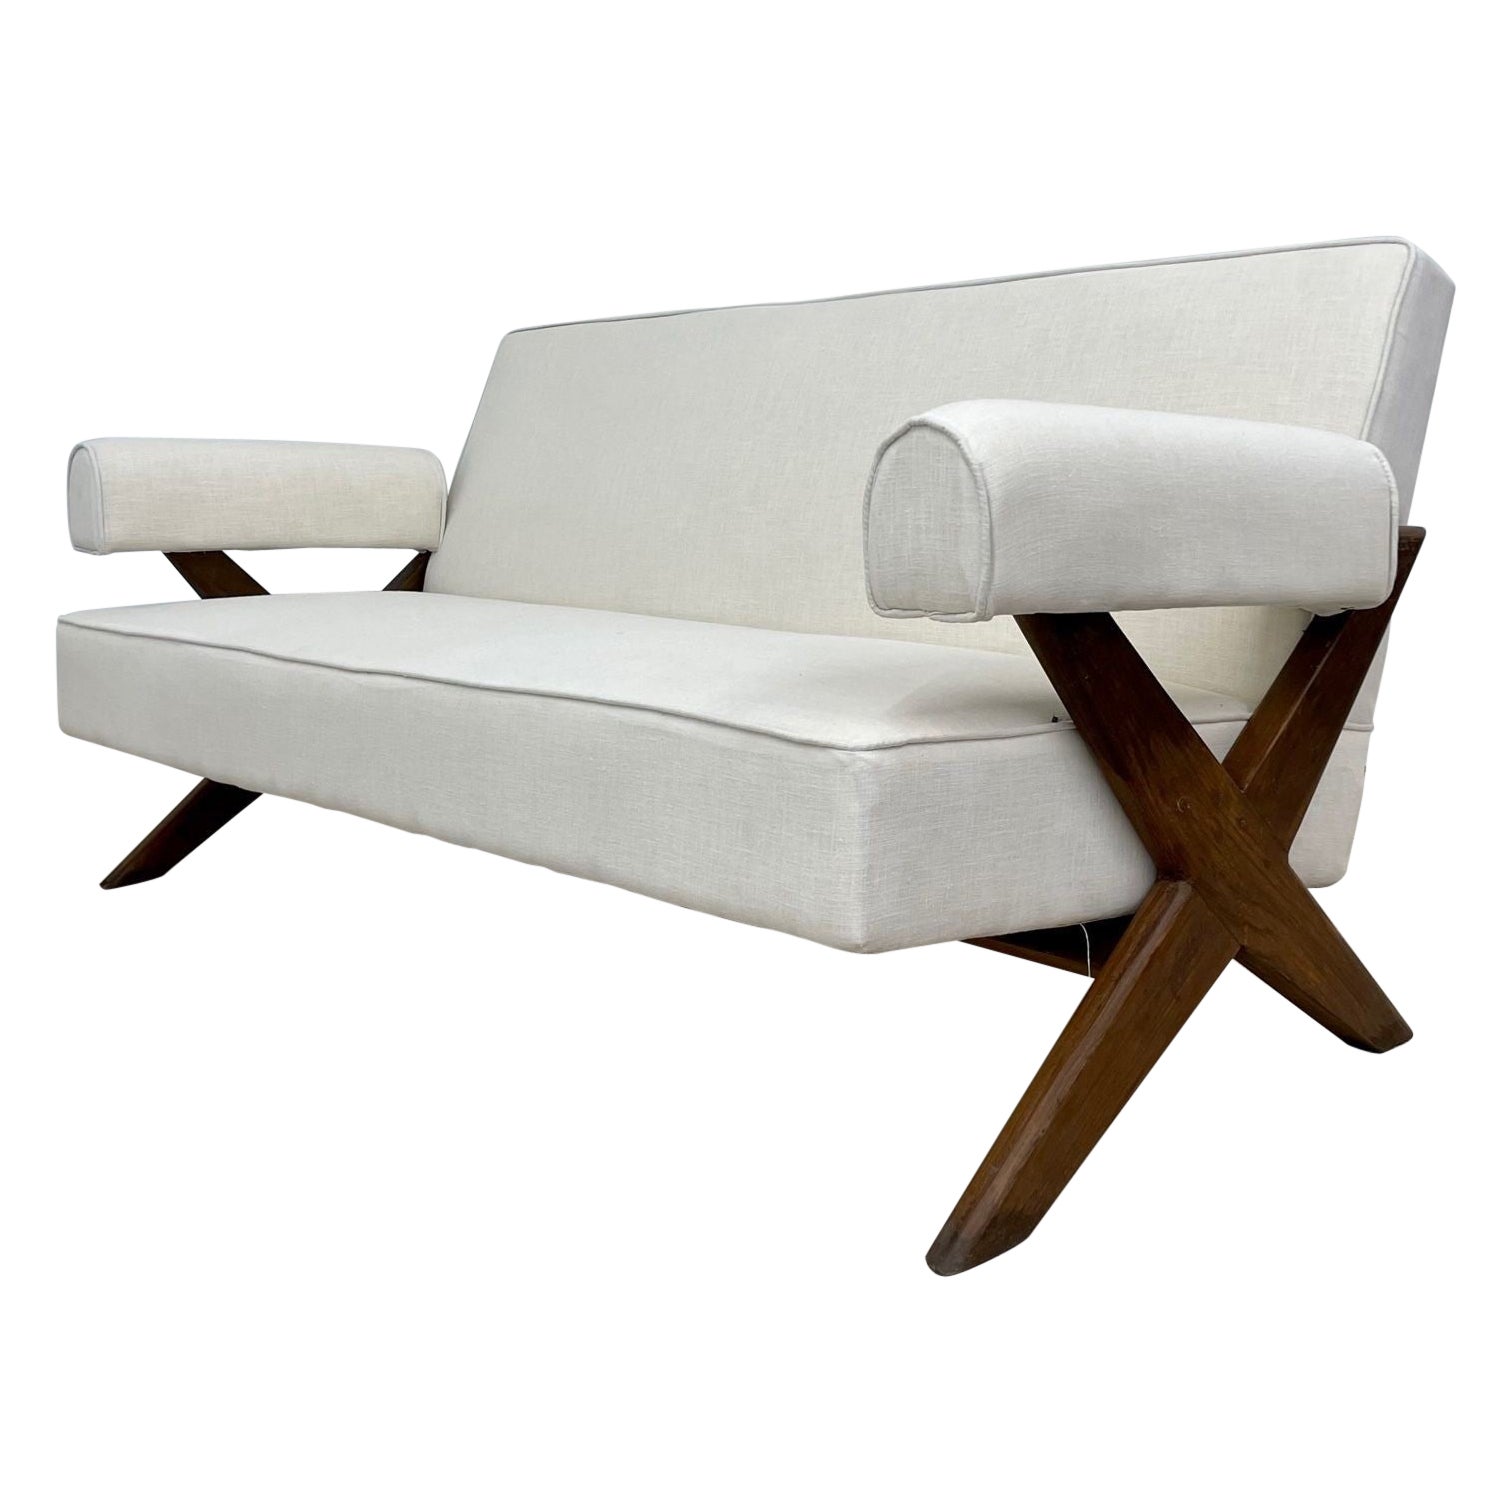 Pierre Jeanneret, French Mid-Century Modern, Sofa, X-Leg, Chandigarh, 1960s For Sale